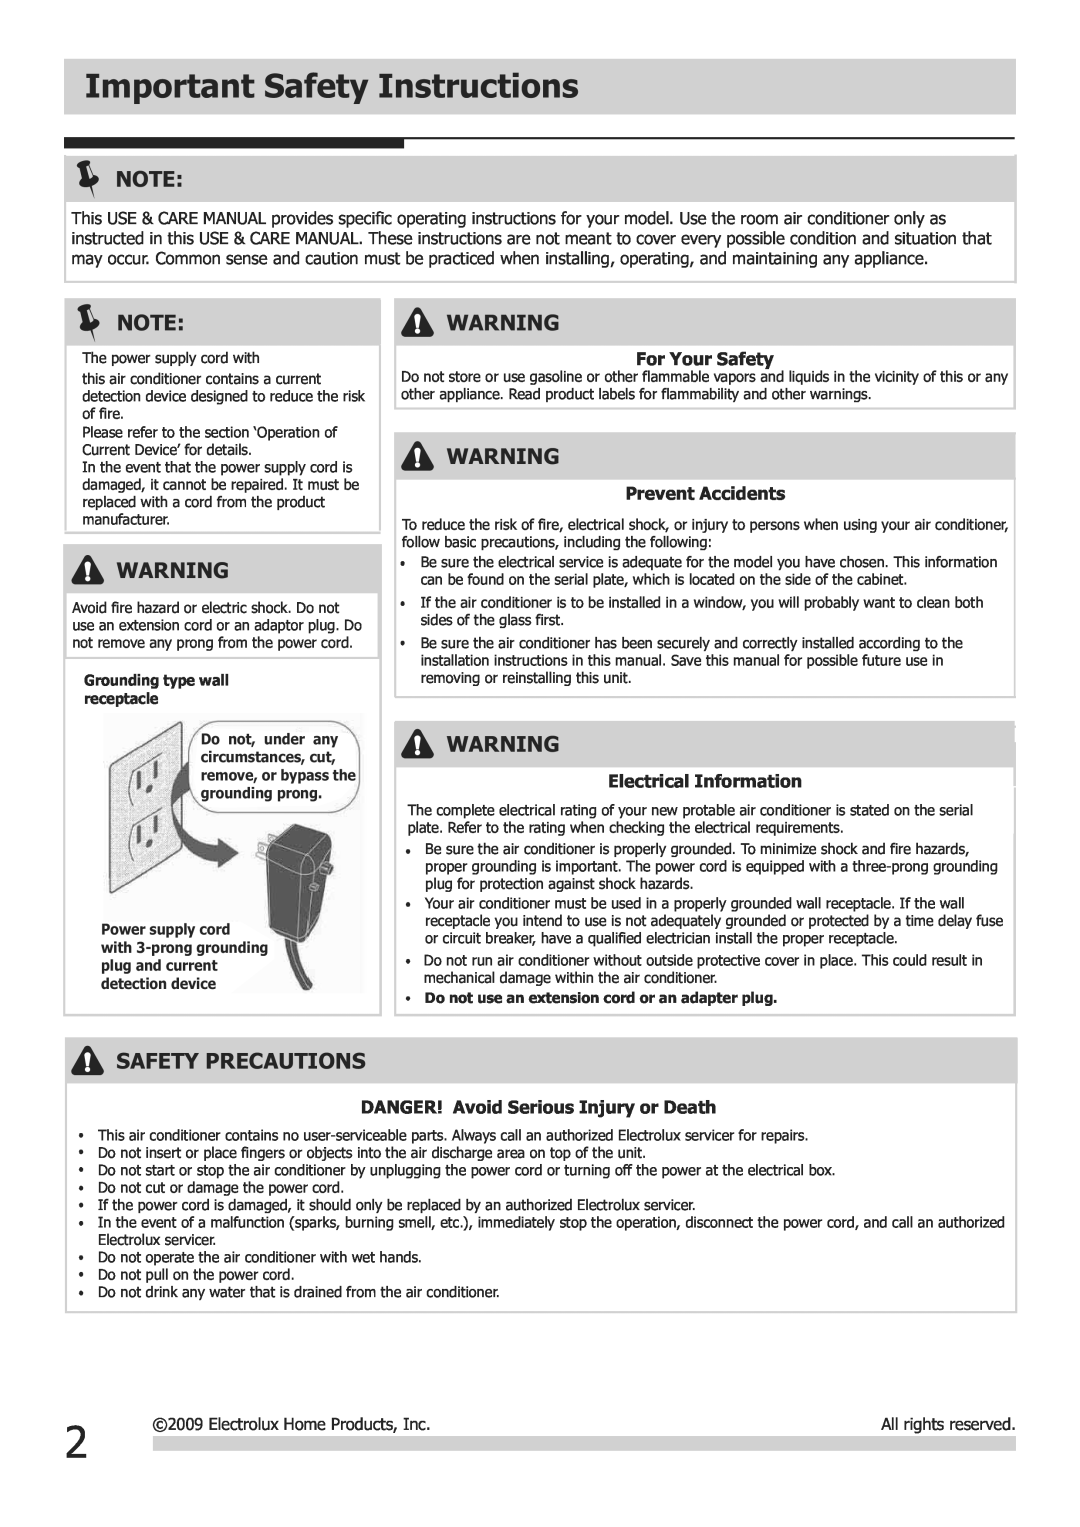 Frigidaire FGHD2472PF Important Safety Instructions, Safety Precautions, For Your Safety, Prevent Accidents 